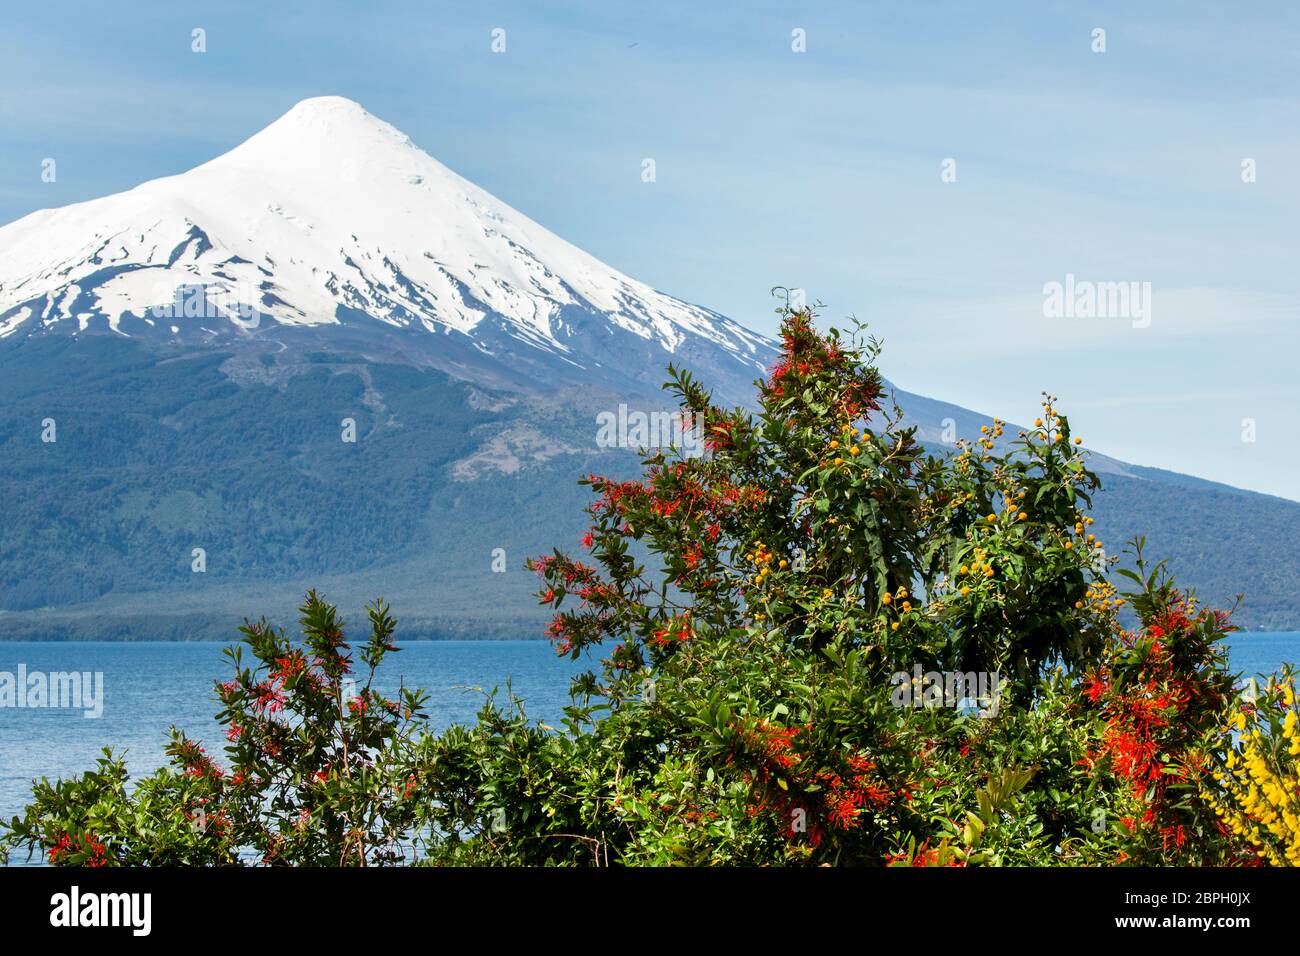 Snow capped Osorno Volcano seen across Lago Llanquihue lake in the Los Lagos region, Chile, with a flowering chilean firebush (embothrium coccineum) Stock Photo